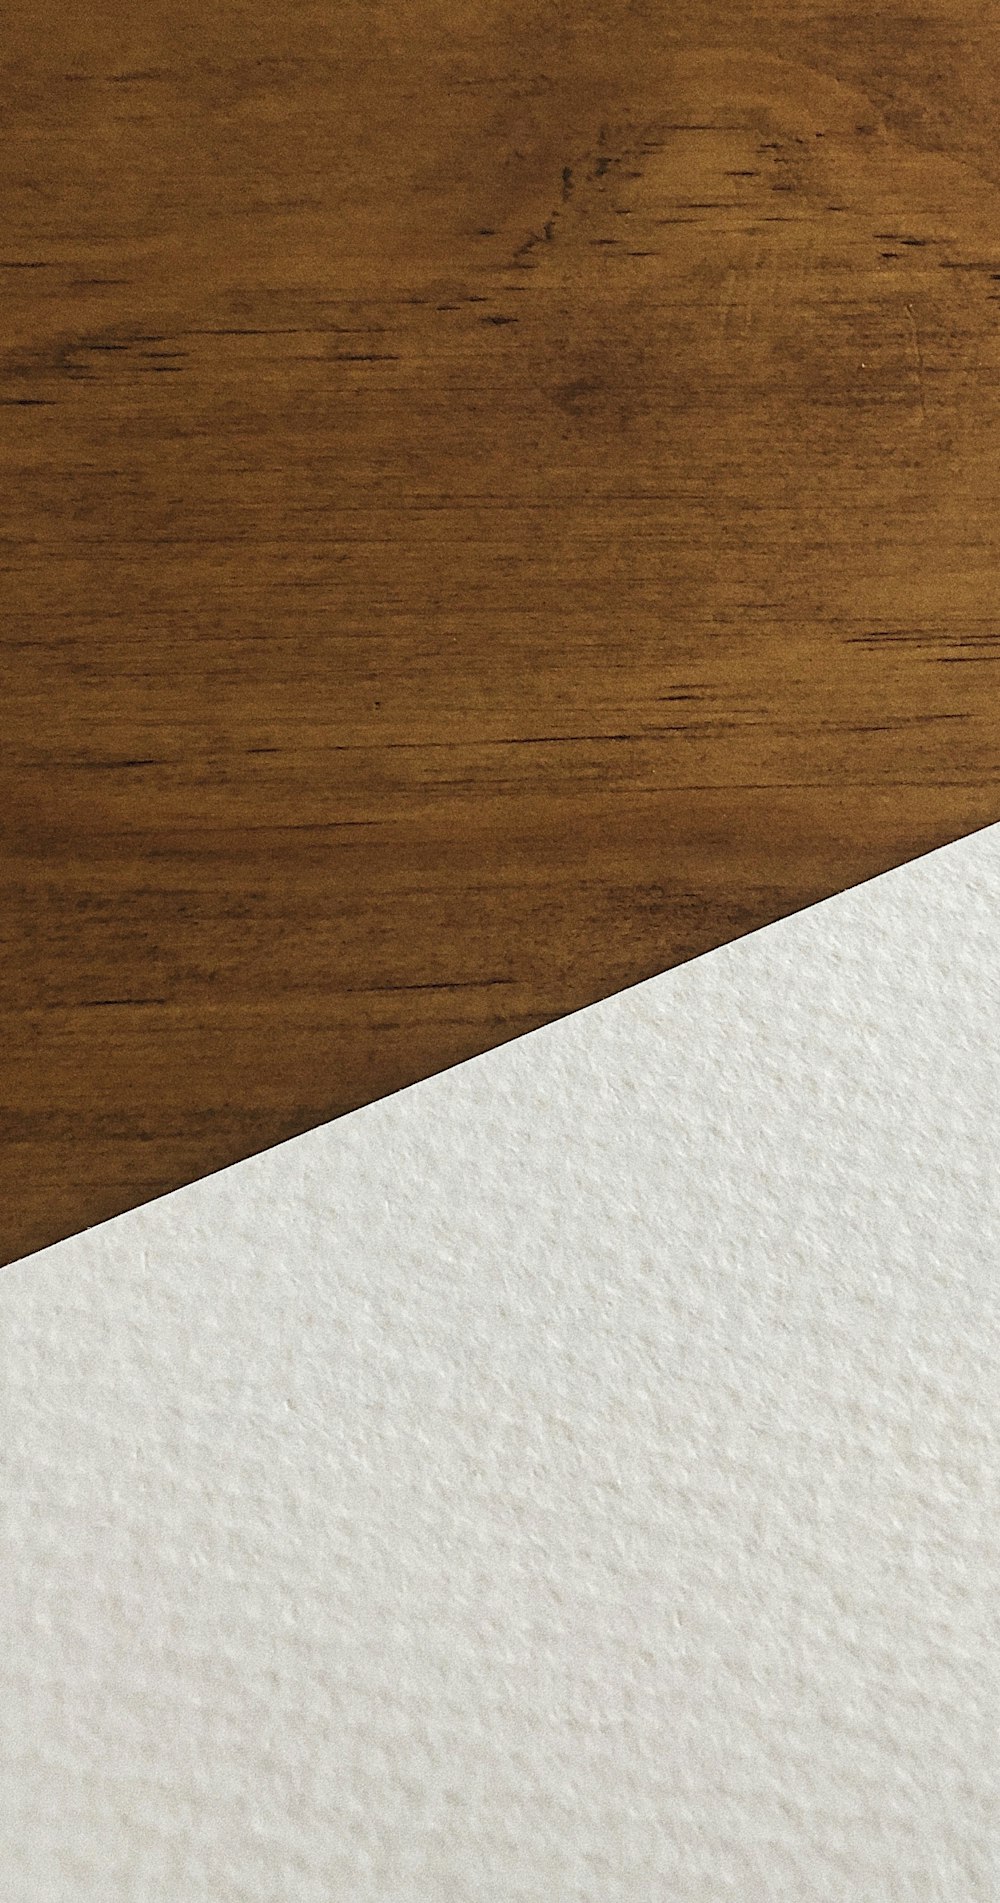 white paper on brown wooden surface